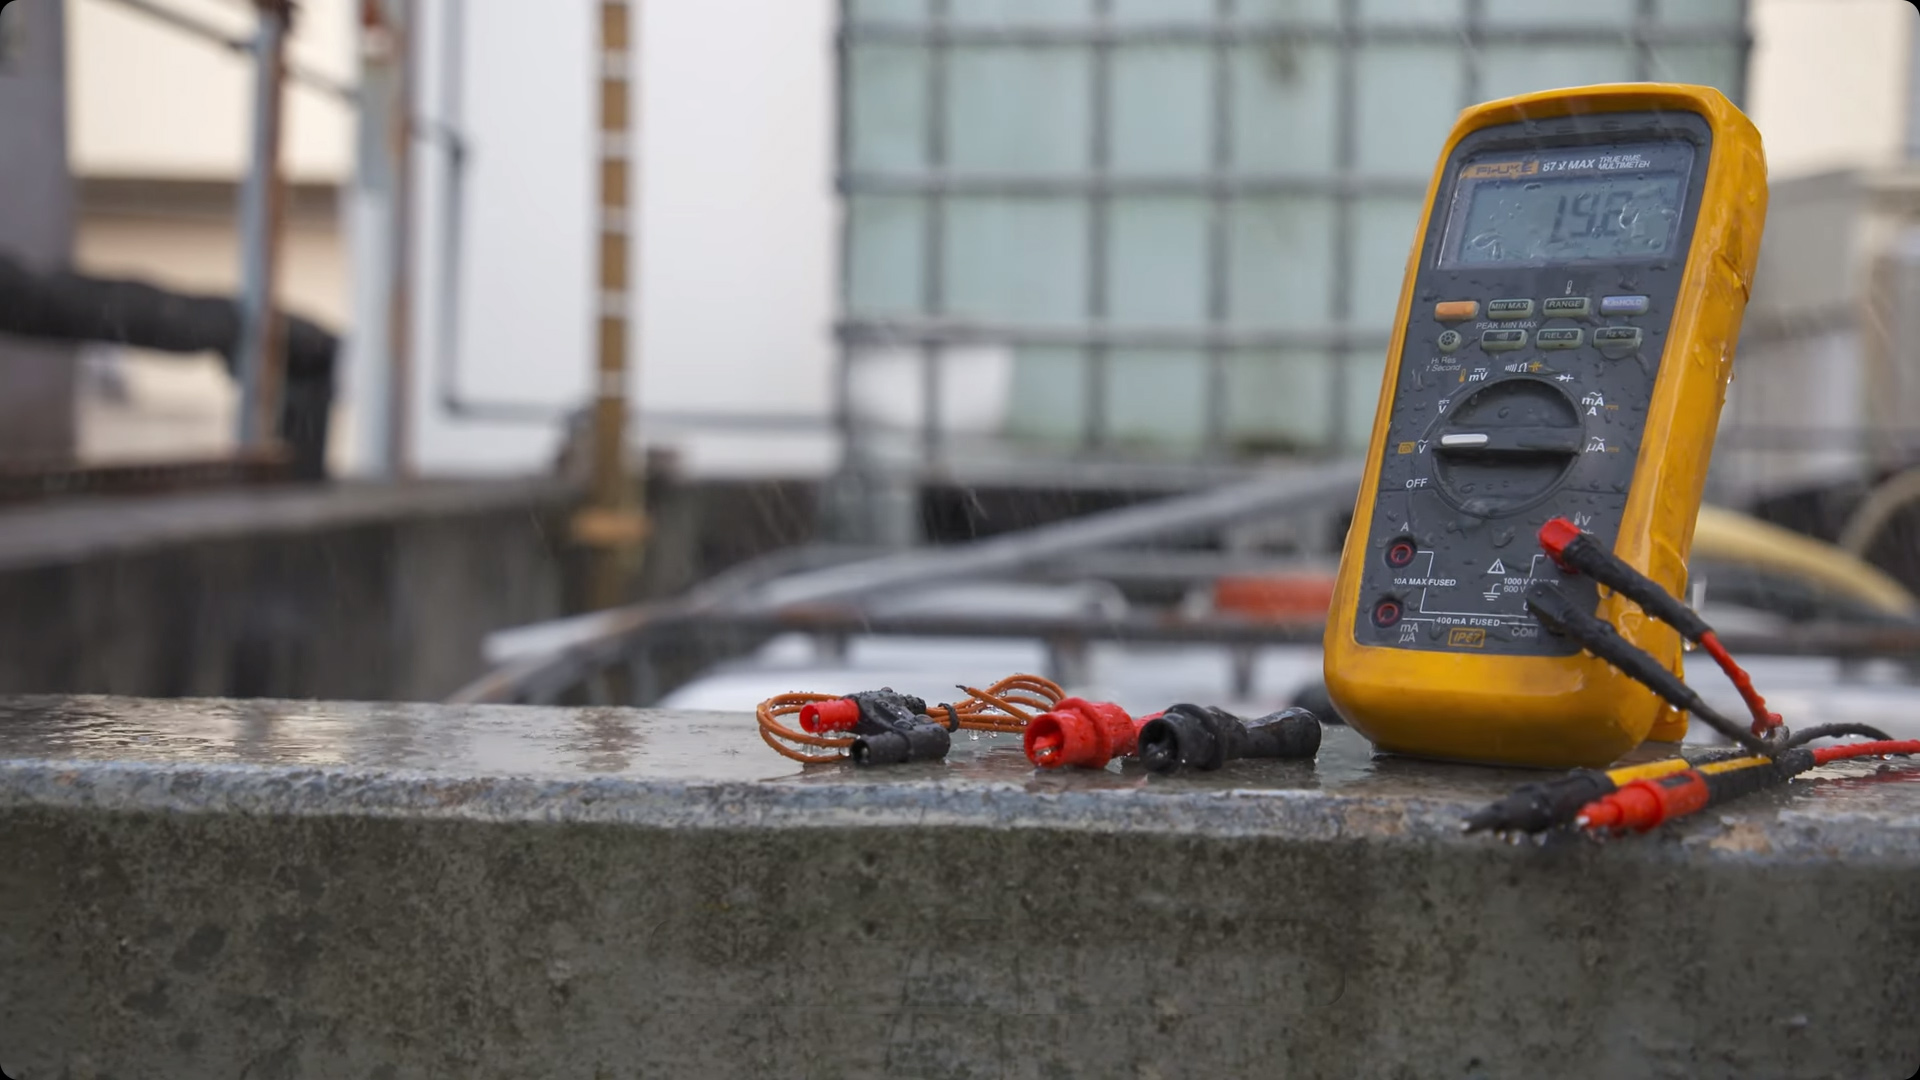 Fluke 87V Max True-RMS Digital Multimeter outside highlighting its an instrument for all working conditions.